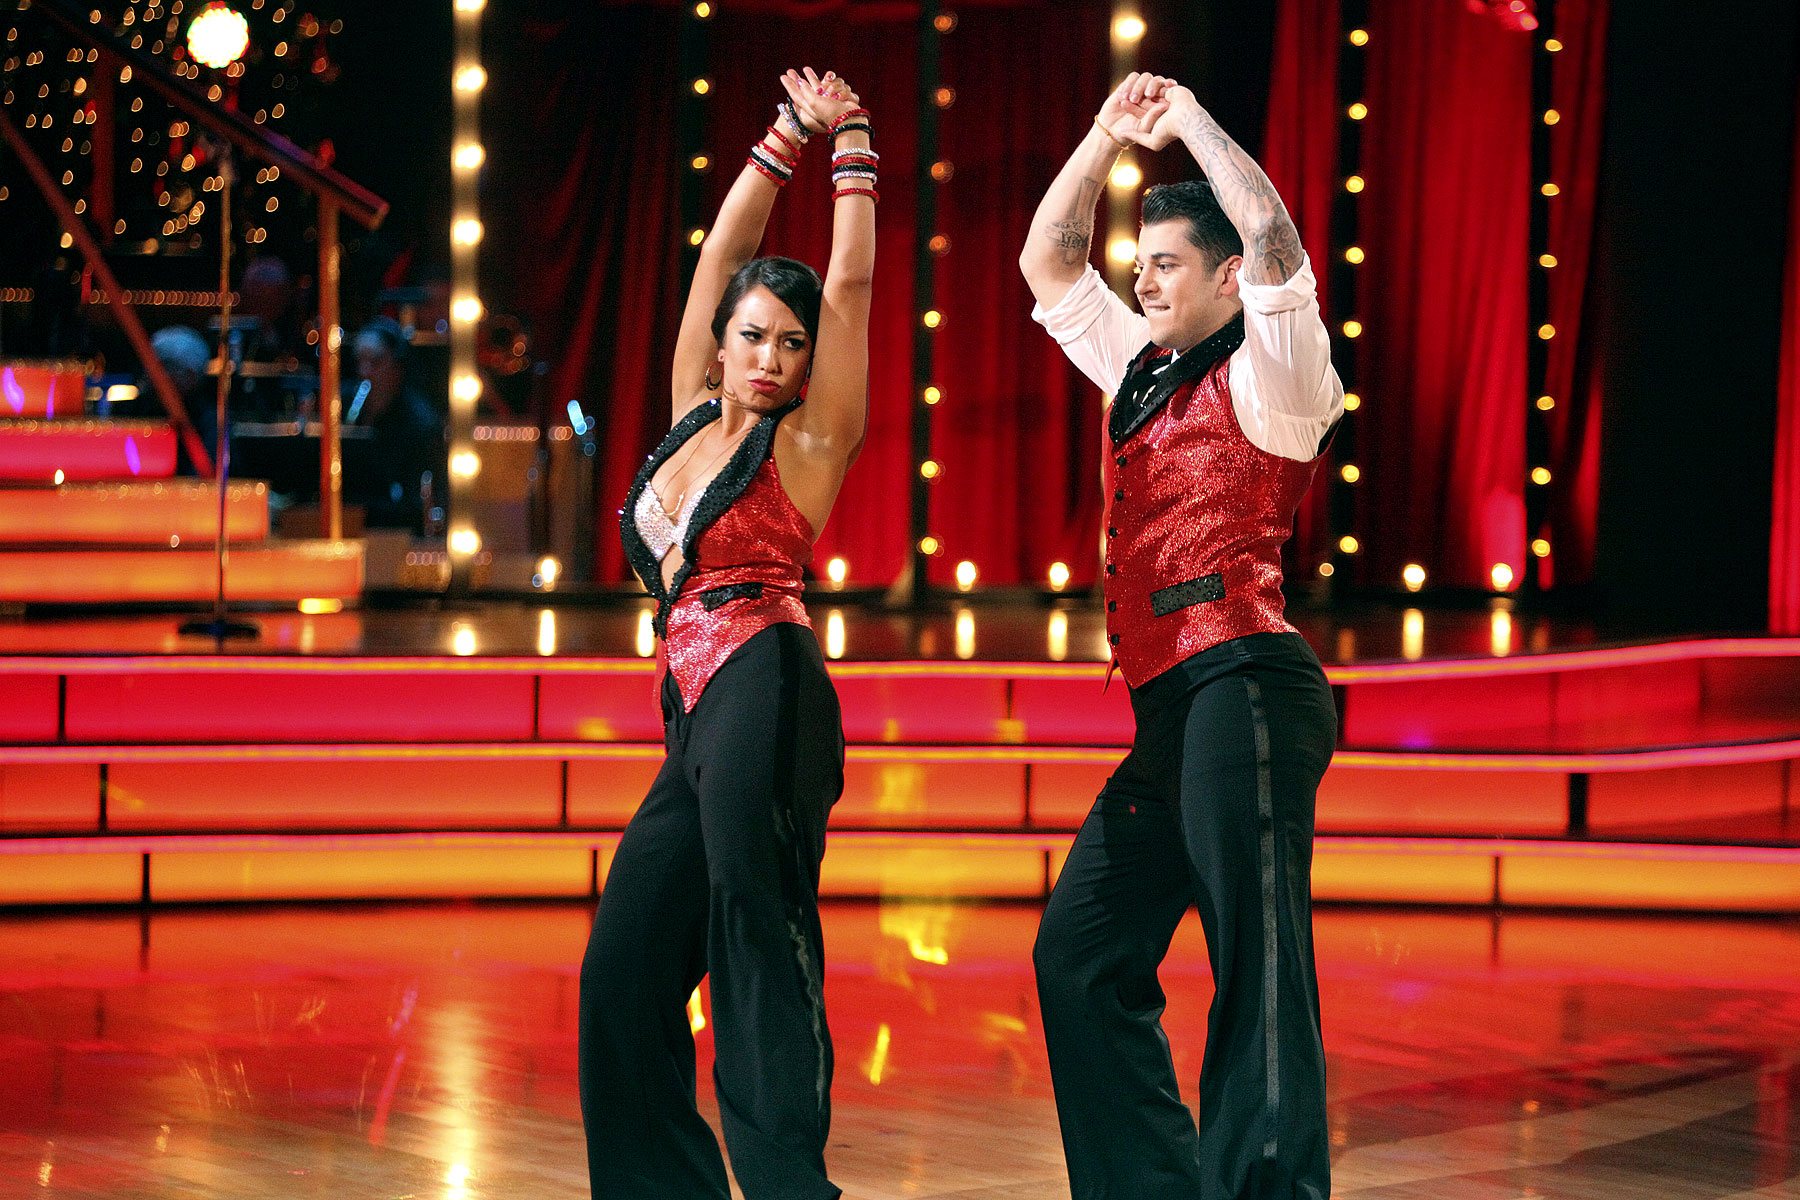 Cheryl Burke and Rob Kardashian wear matching glittery red vests as they dance with their arms in the air on 'Dancing With the Stars.'